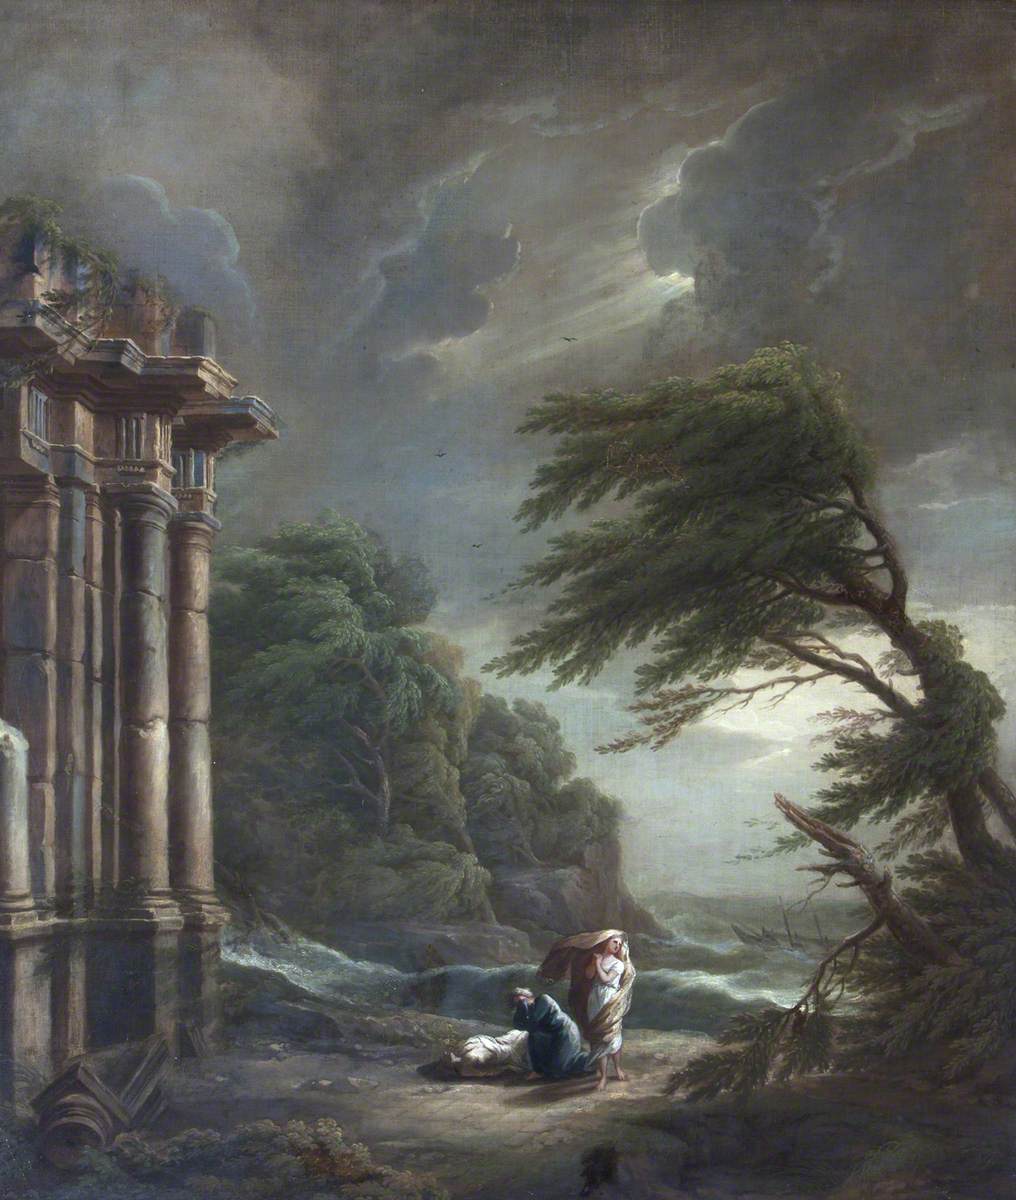 Stormy Seashore with Ruined Temple, Shipwreck, and Figures